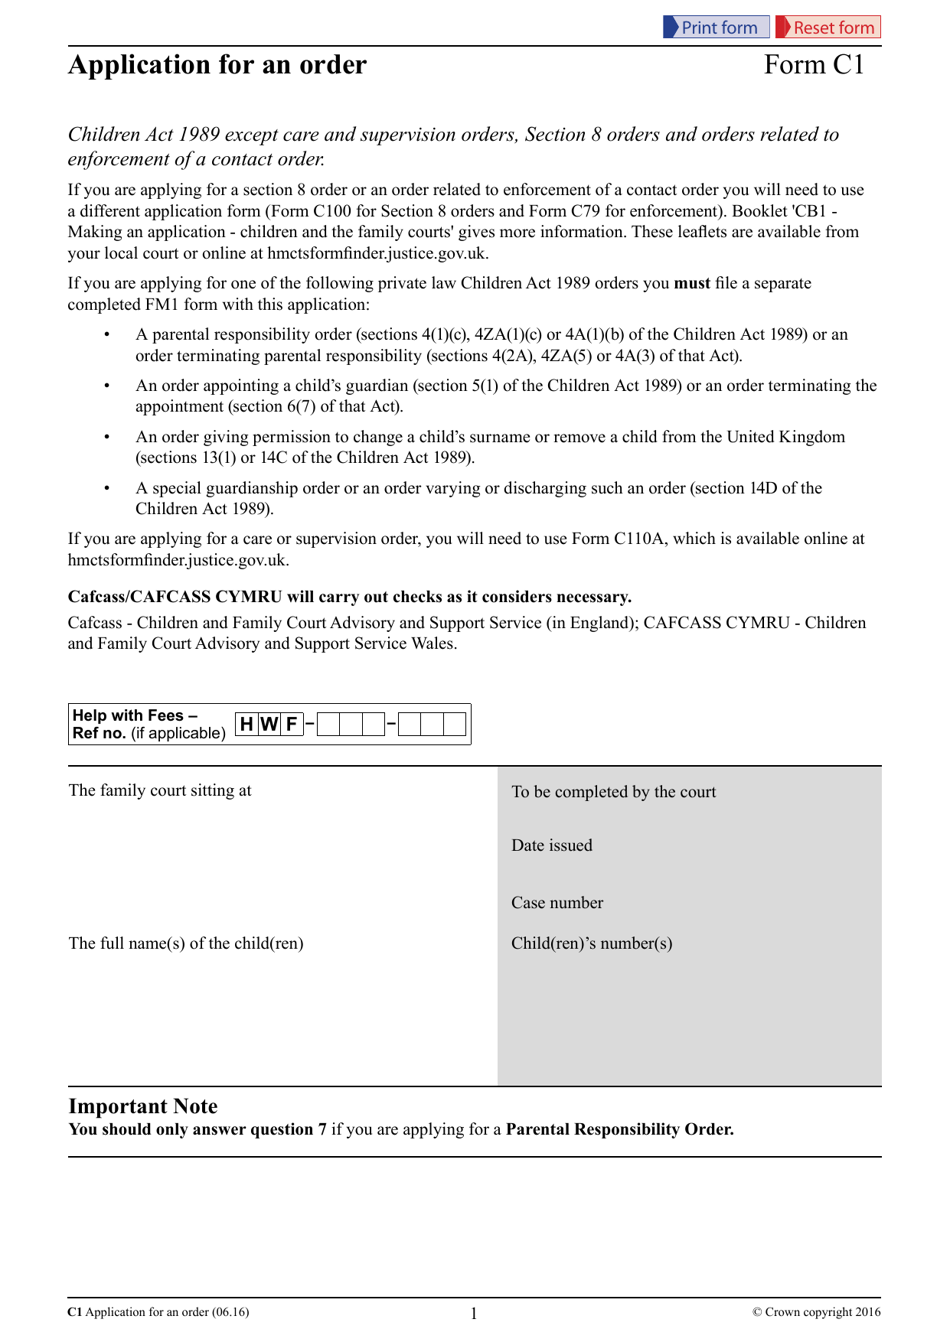 Form C1 Application for an Order - United Kingdom, Page 1